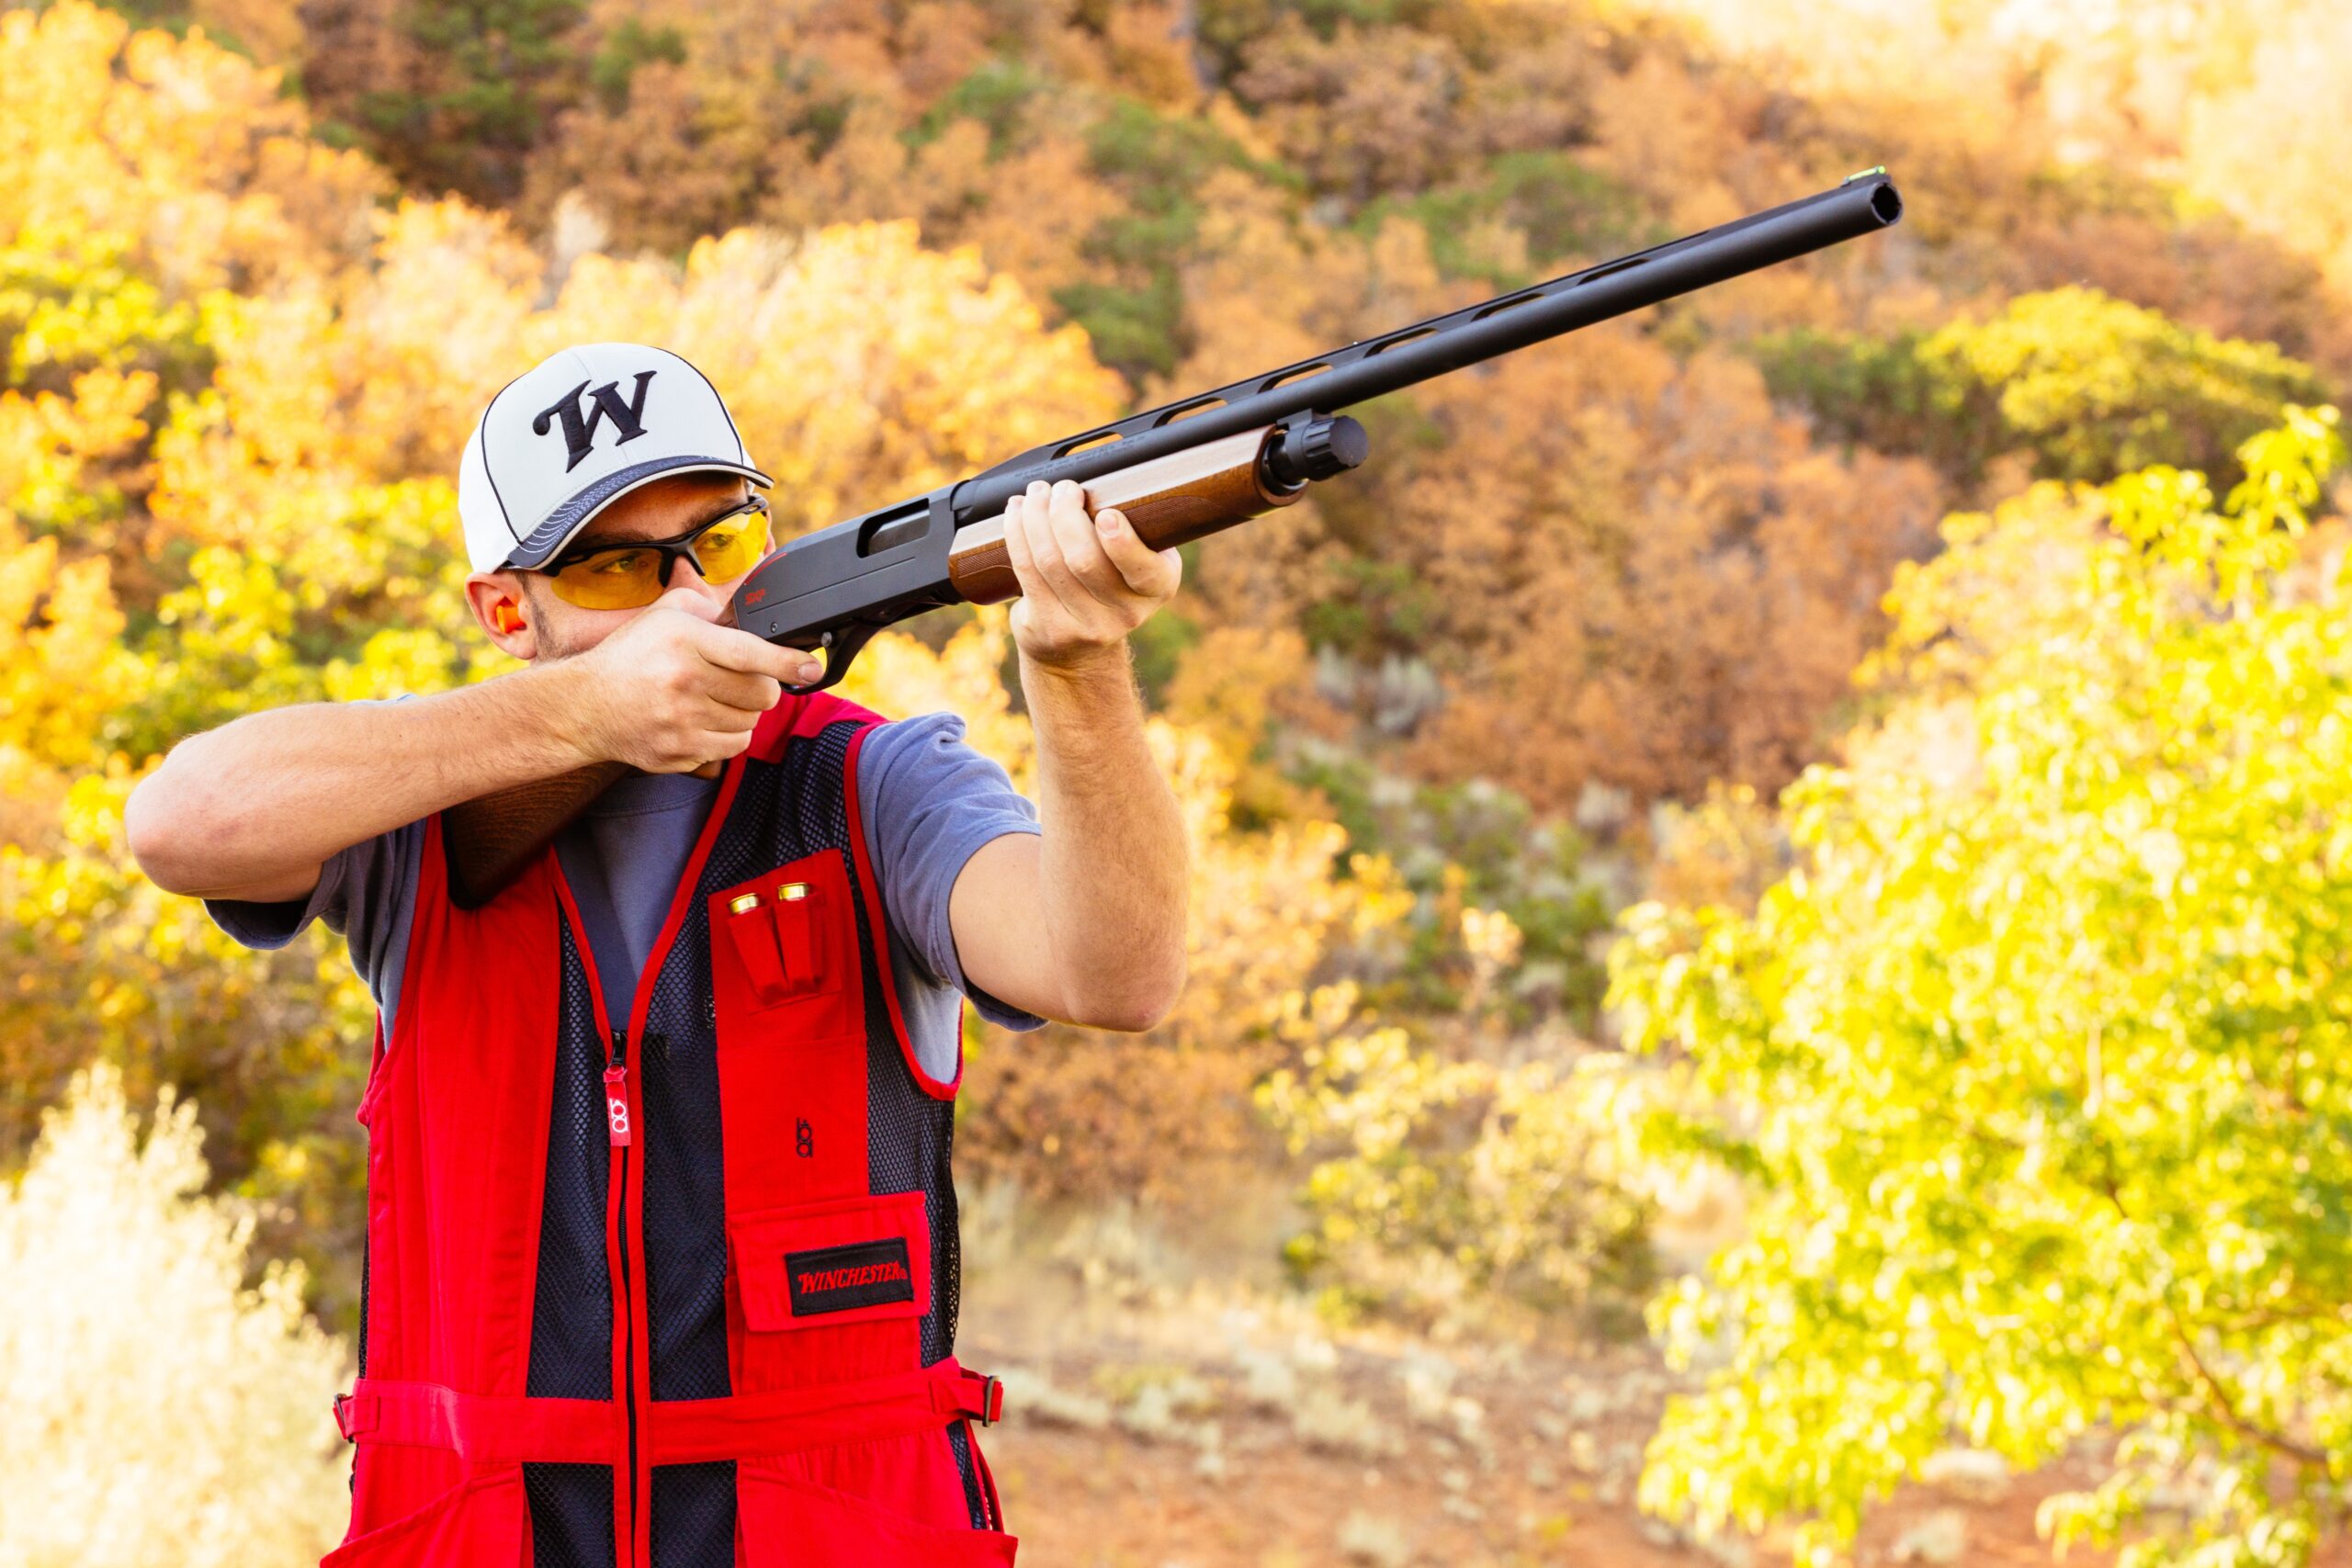 You Don’t Have to Buy a Pricey Shotgun to Become an Accomplished Target Shooter